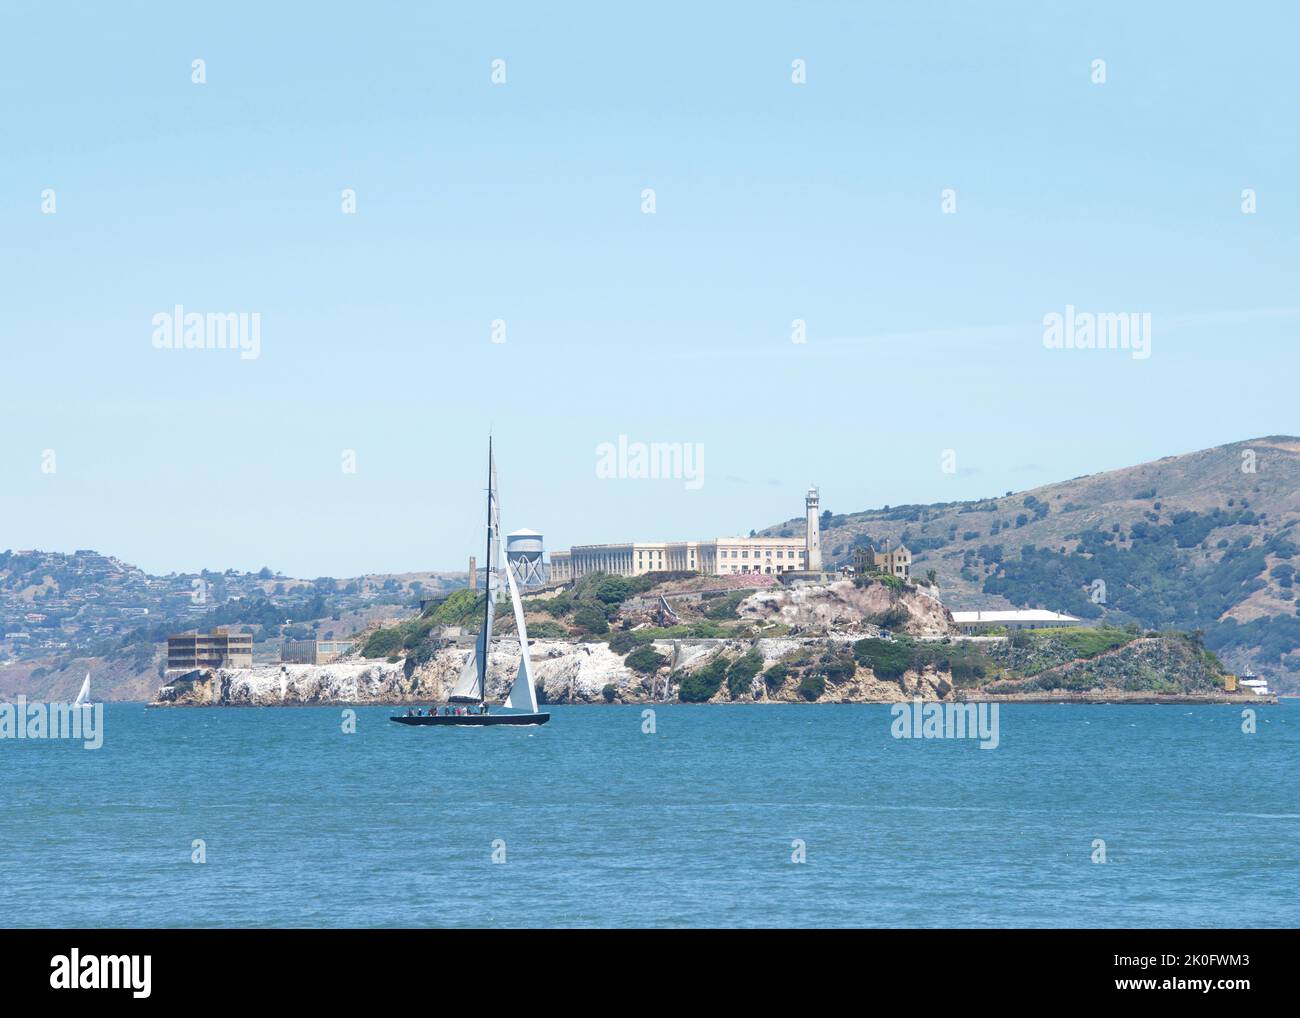 Alcatraz Island, 1.25 miles away from San Francisco. The island's facilities are managed by the National Park Service and it is open to the public for Stock Photo